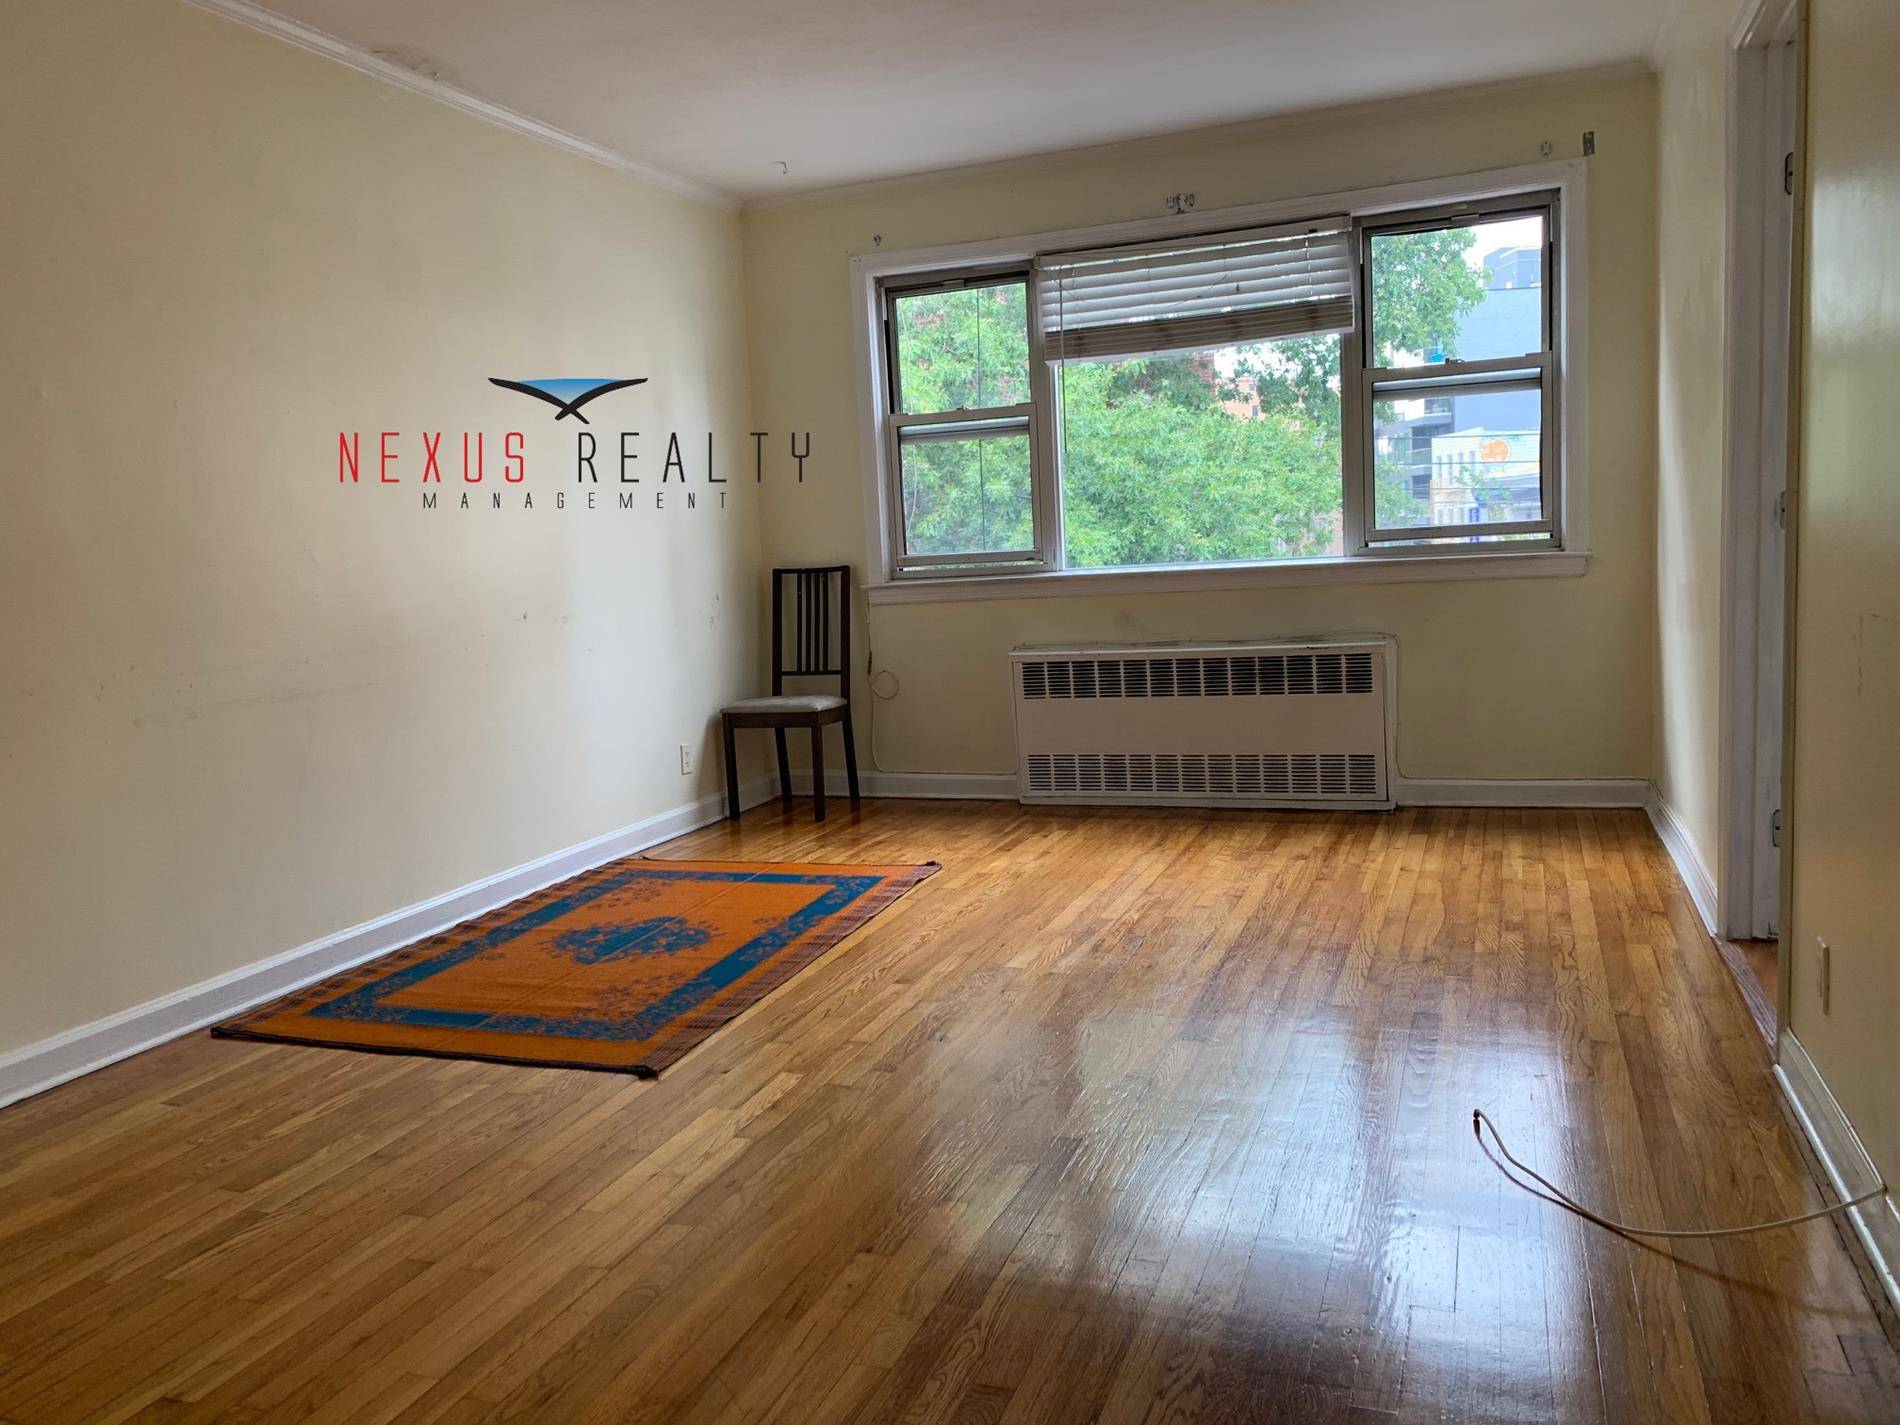 Spacious 3 Bedroom apartment in Astoria ONLY 2300 NO BROKERS FEE3 Queen size bedrooms on the 2nd floor in a 3 family houseSpacious living roomEat in kitchen with lots of ...